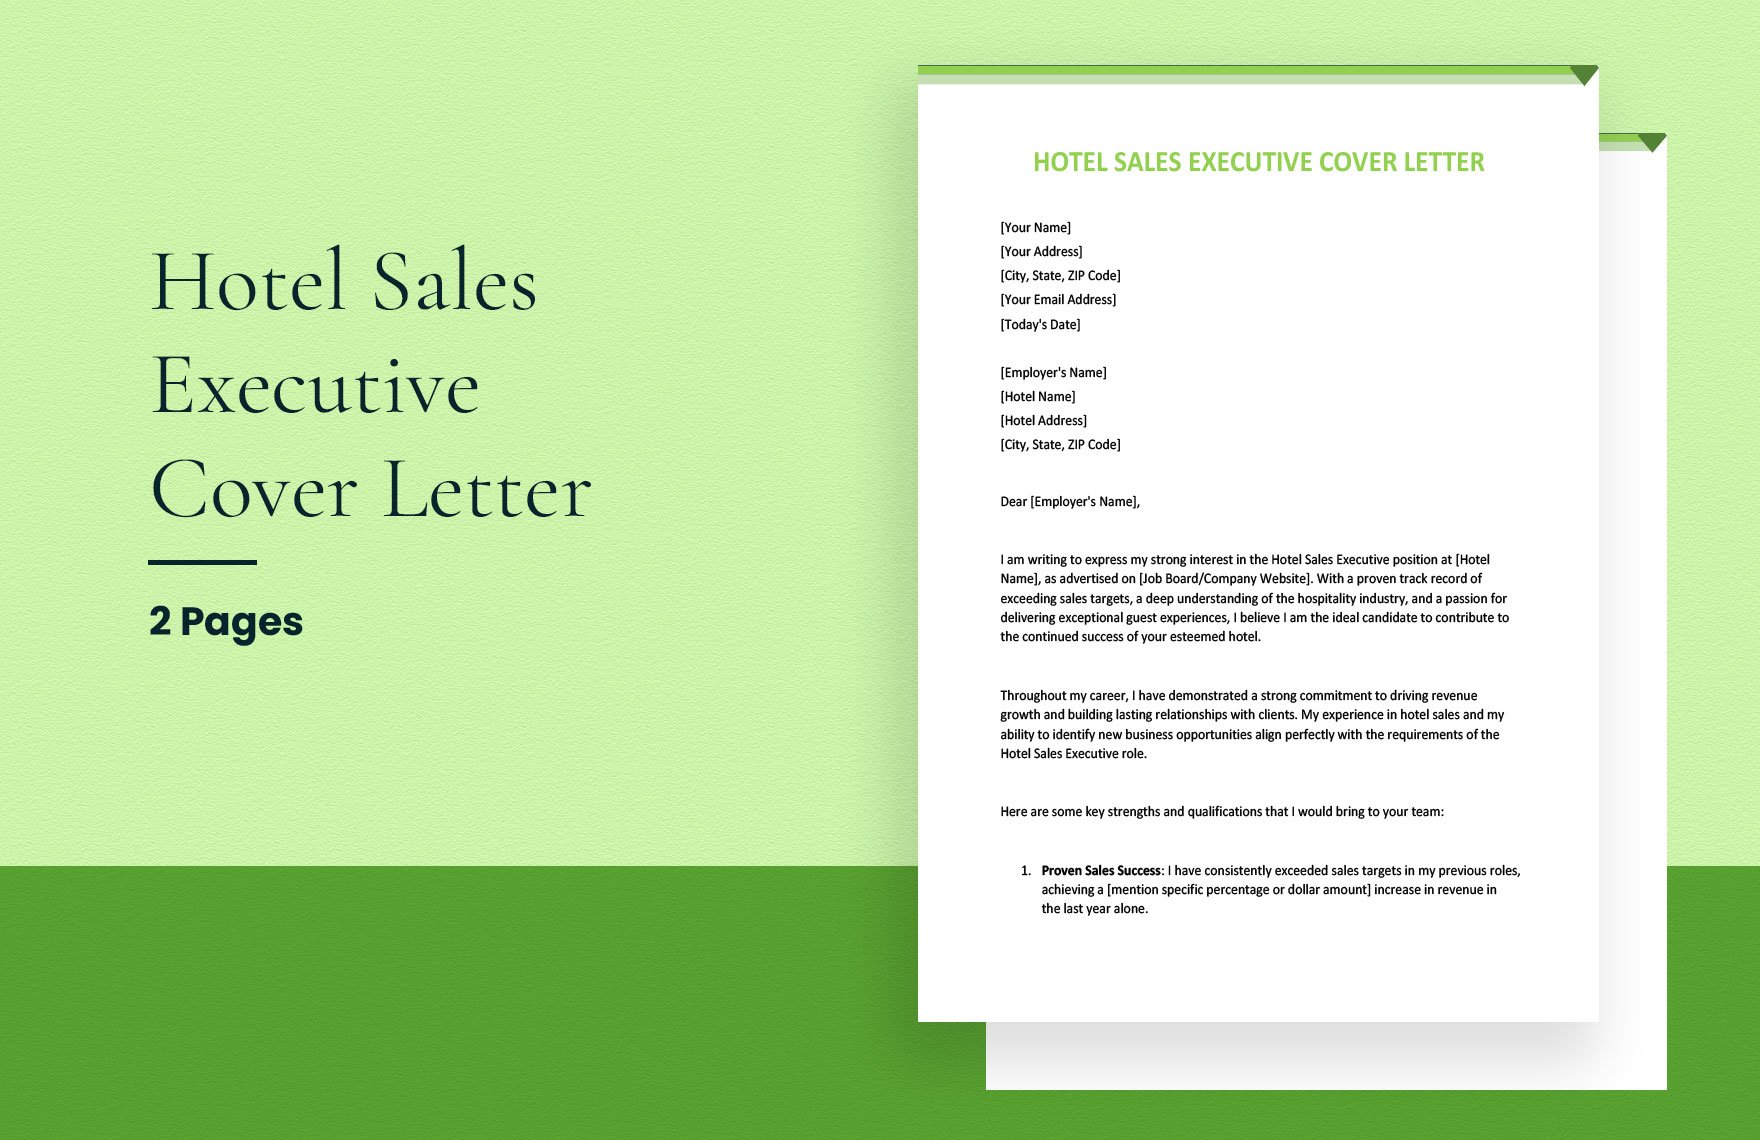 Hotel Sales Executive Cover Letter